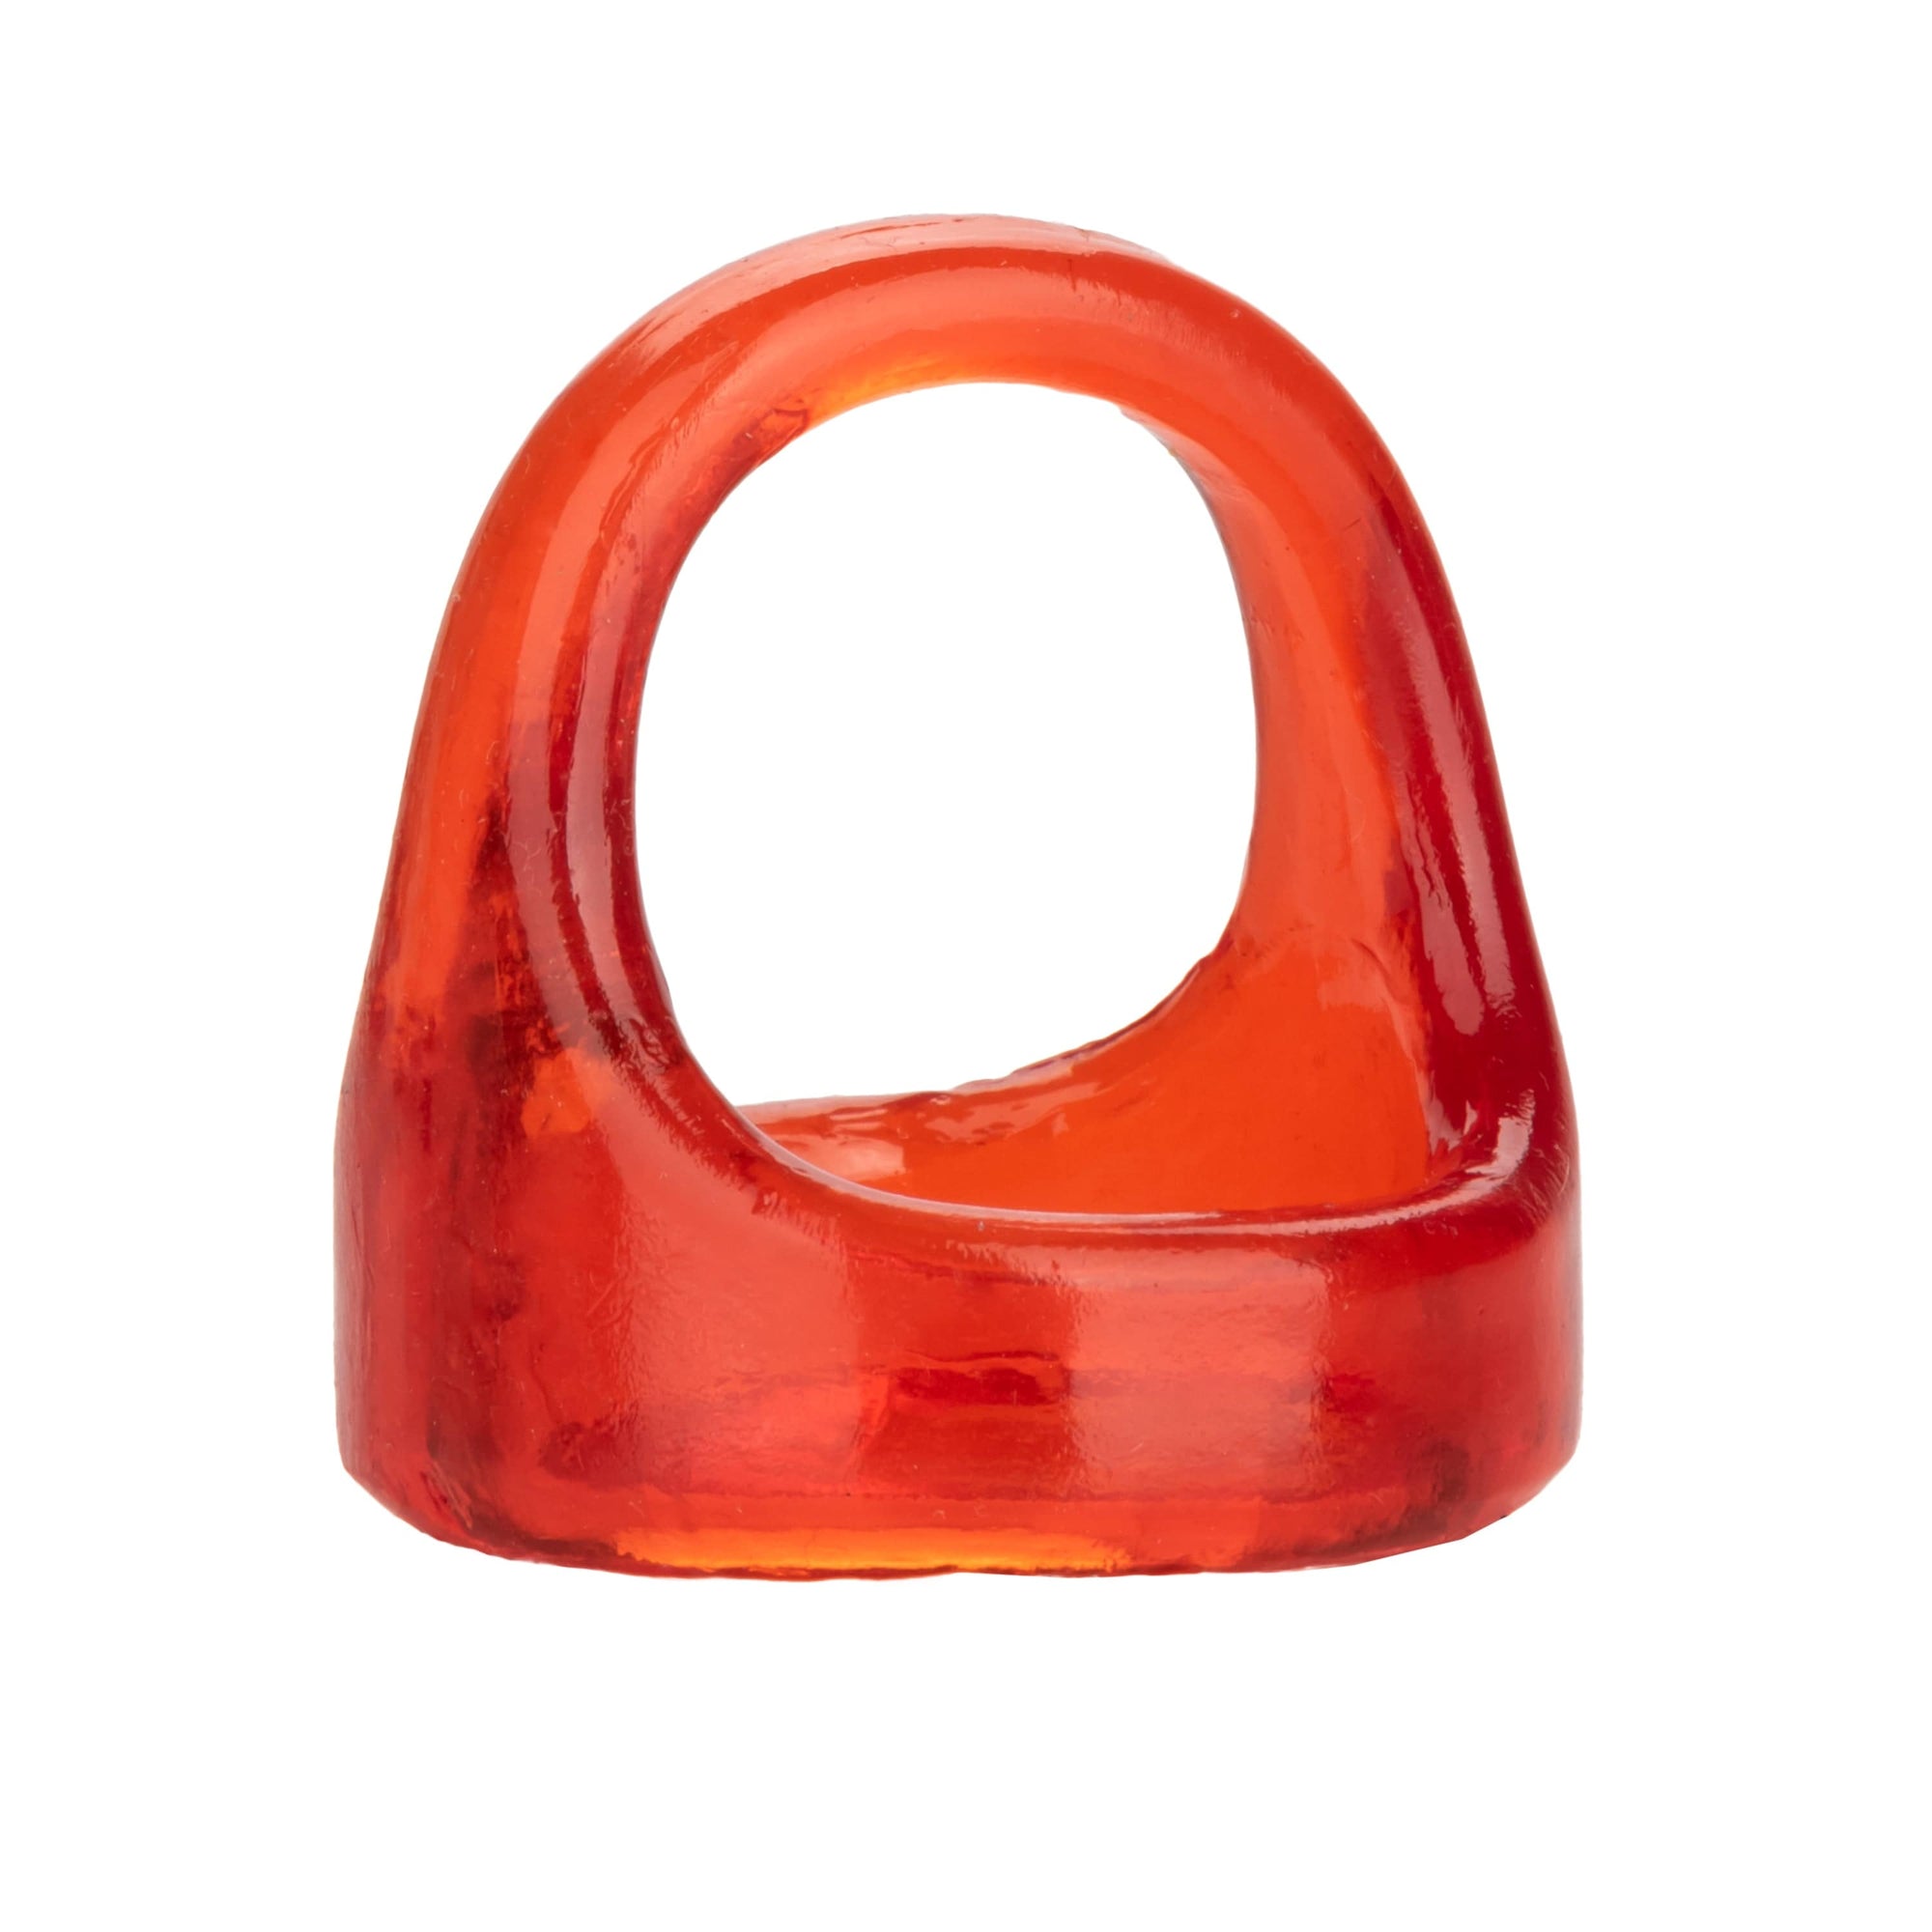 California Exotics - COLT XL Snug Tugger Dual Support Cock Ring (Red) Rubber Cock Ring (Non Vibration) 716770093462 CherryAffairs